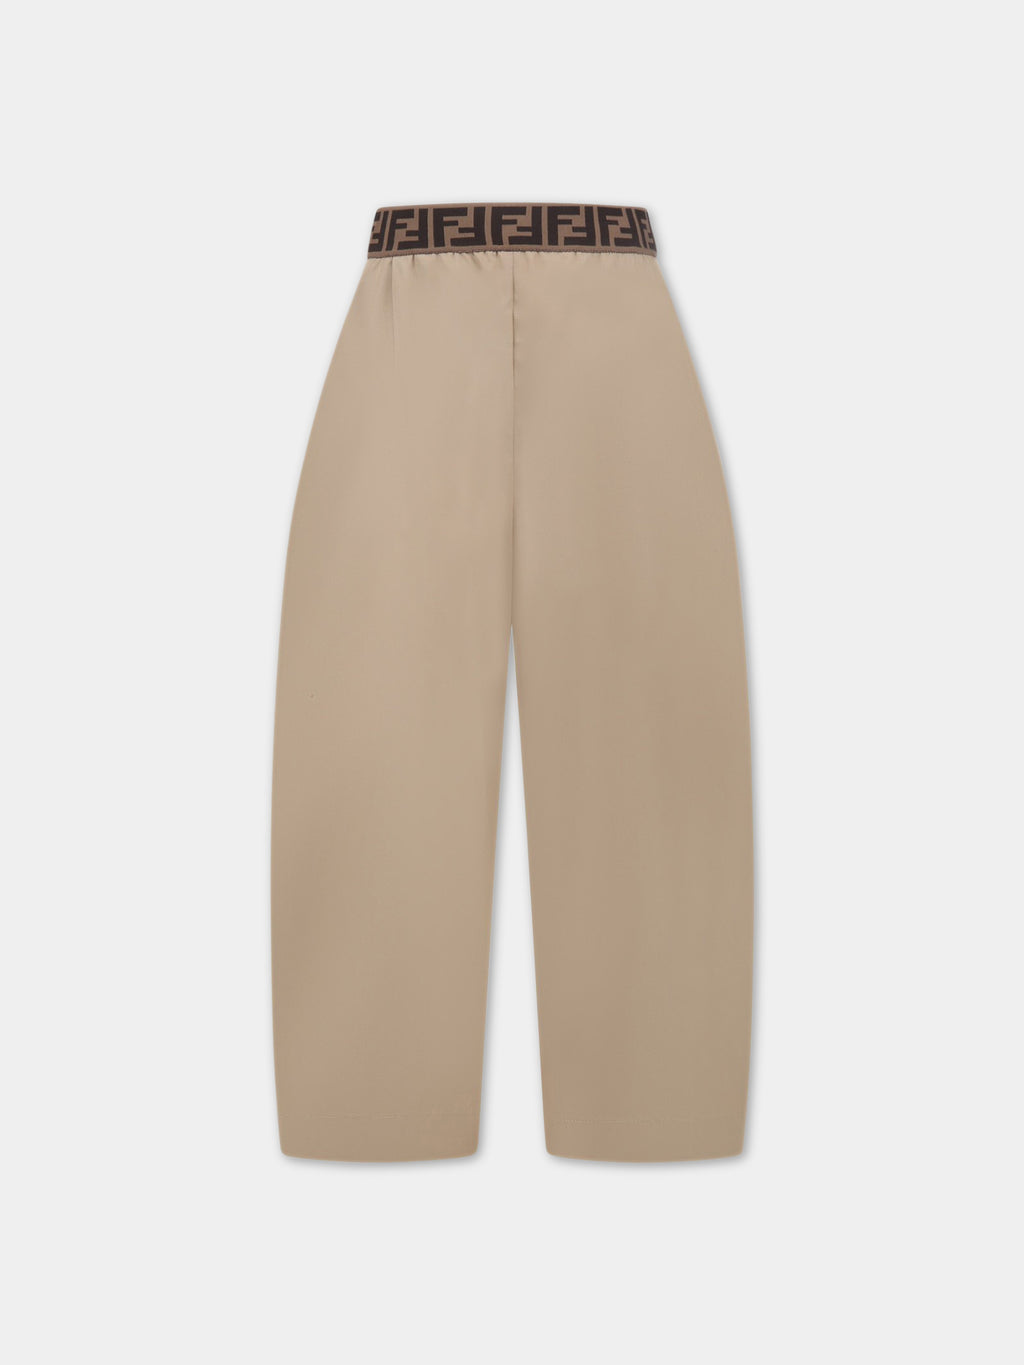 Beige culottes for girl with FF